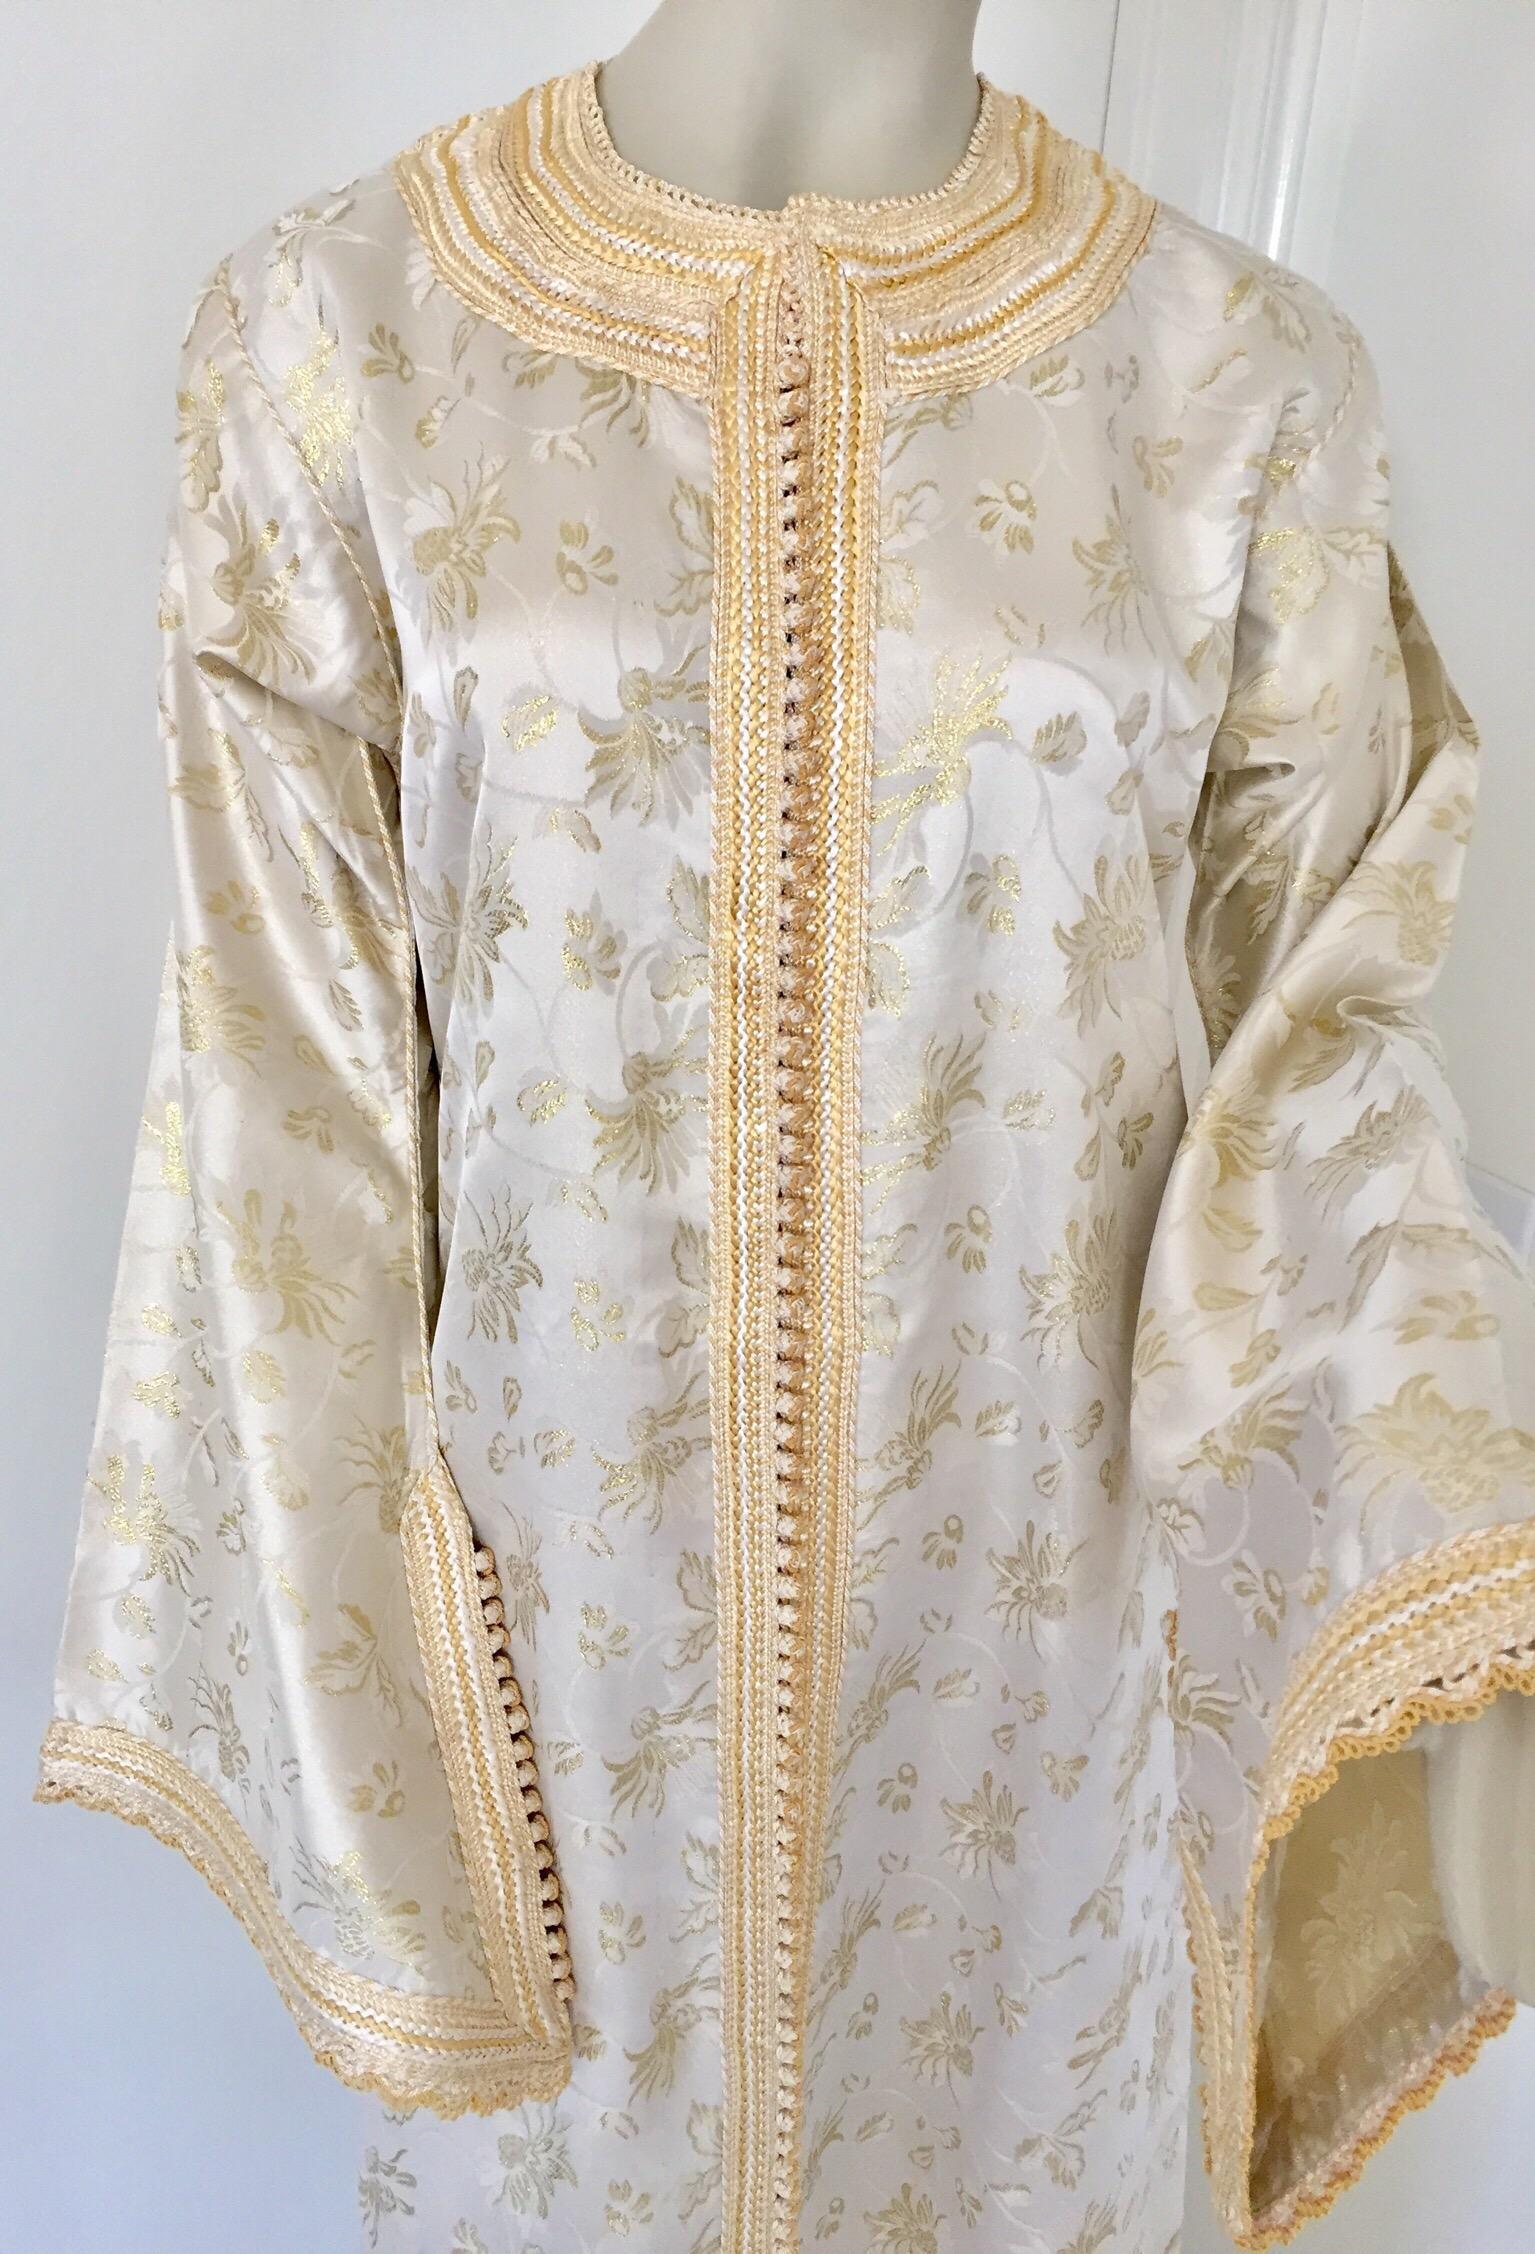 Elegant Moroccan Caftan White and Gold Metallic Floral Brocade For Sale 5